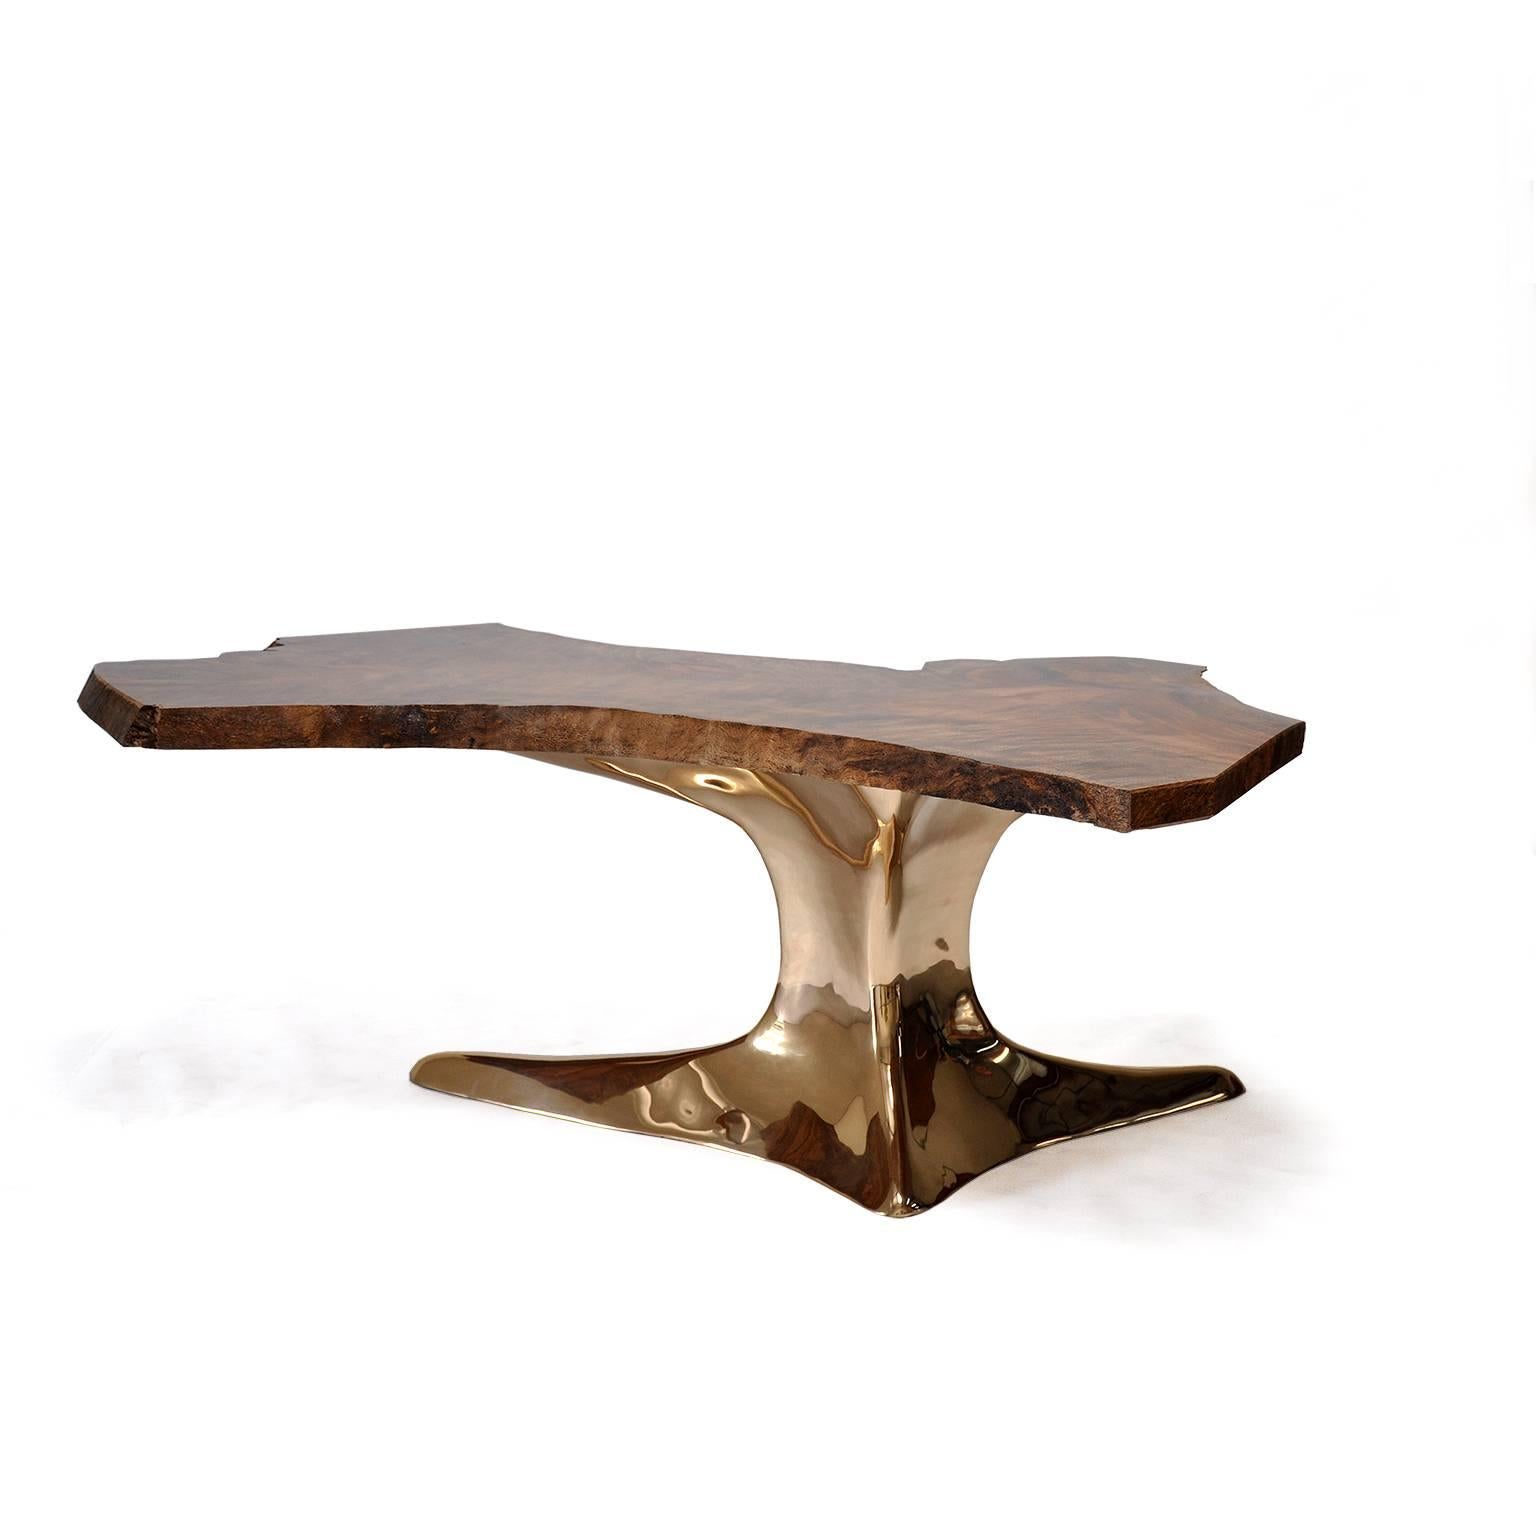 The root table is a celebration of the beauty of a naturally formed wood slab, elevated by a lustrous bronze sculpture base.

The bronze table base is identical from piece to piece, being cast from our own molds. The tabletop, however, will carry